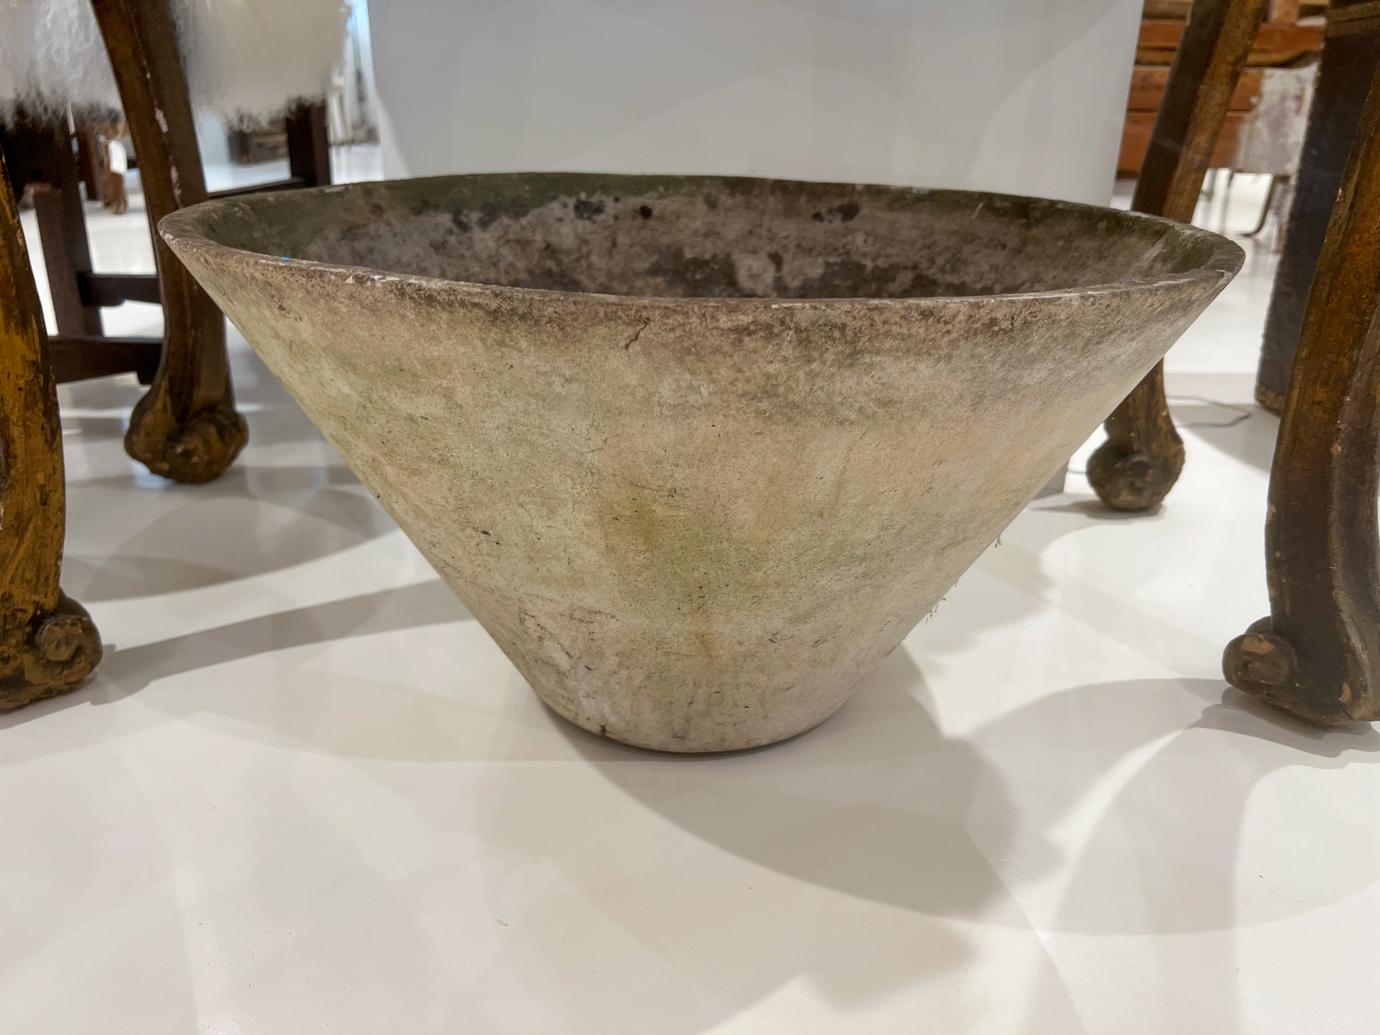 Willy Guhl was a famous Swiss designer who created planters in many shapes. These are formed from a slab of Eternit (a fibrous concrete material) moulded into a large conical vessel. 
 